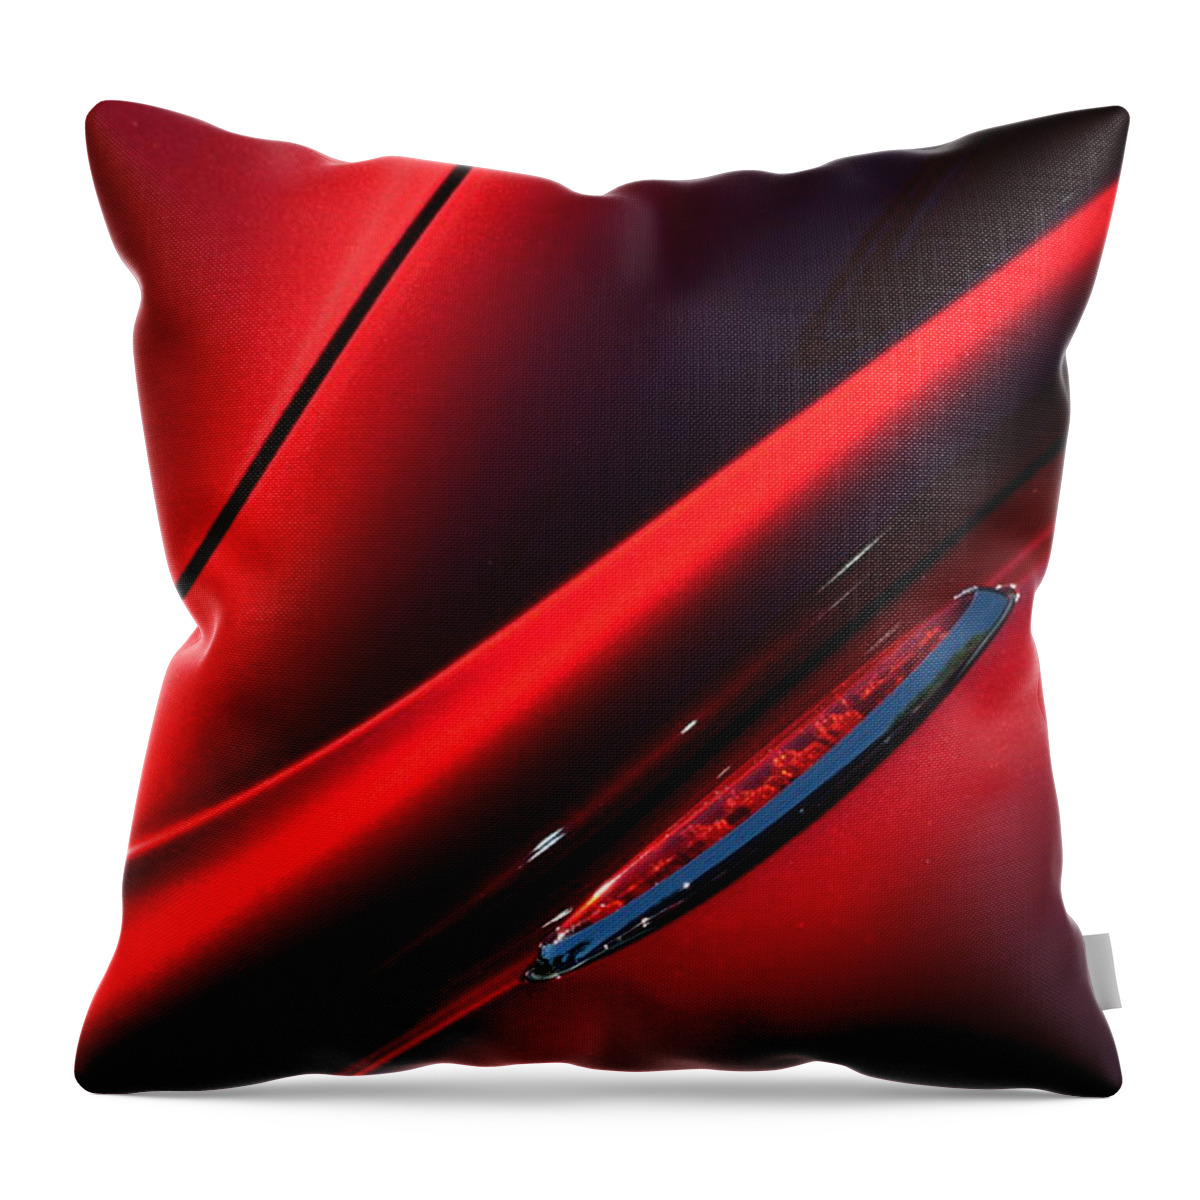  Throw Pillow featuring the photograph RED by Dean Ferreira